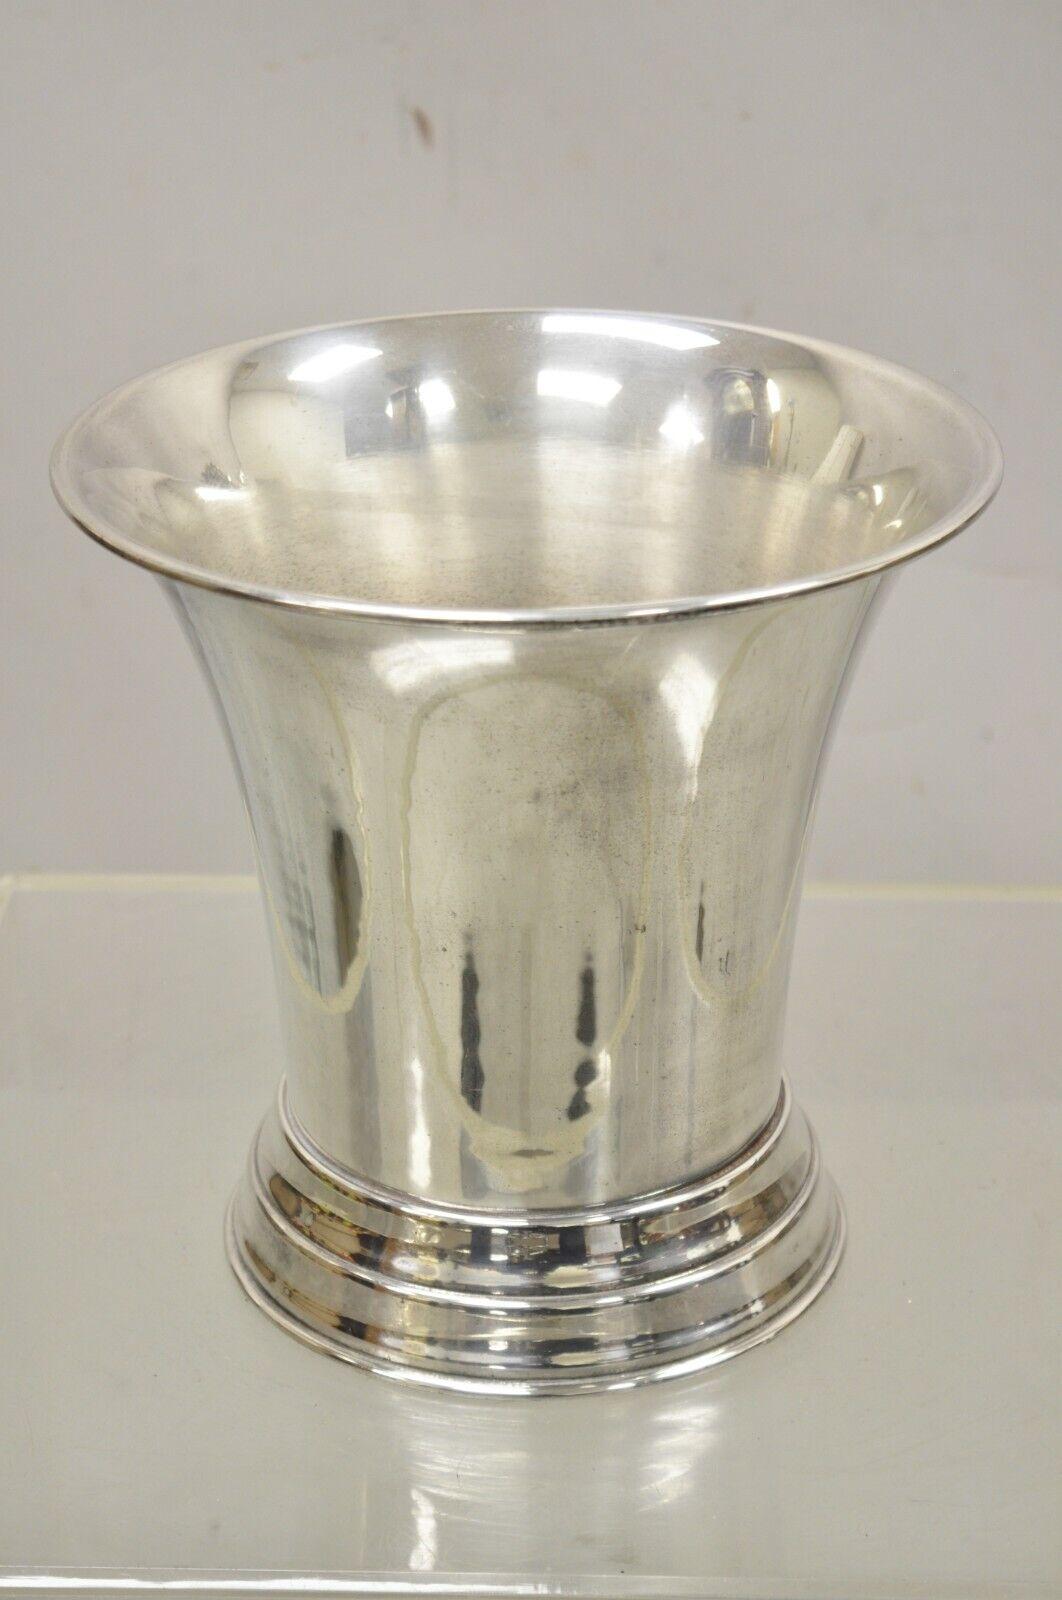 Vintage Silver Plated Modern Fluted Regency Style Champagne Chiller Wine Ice Bucket. Item features a nice fluted body, footed base, round form, very nice vintage item, clean modernist lines, great style and form. Circa Mid to Late 20th Century.